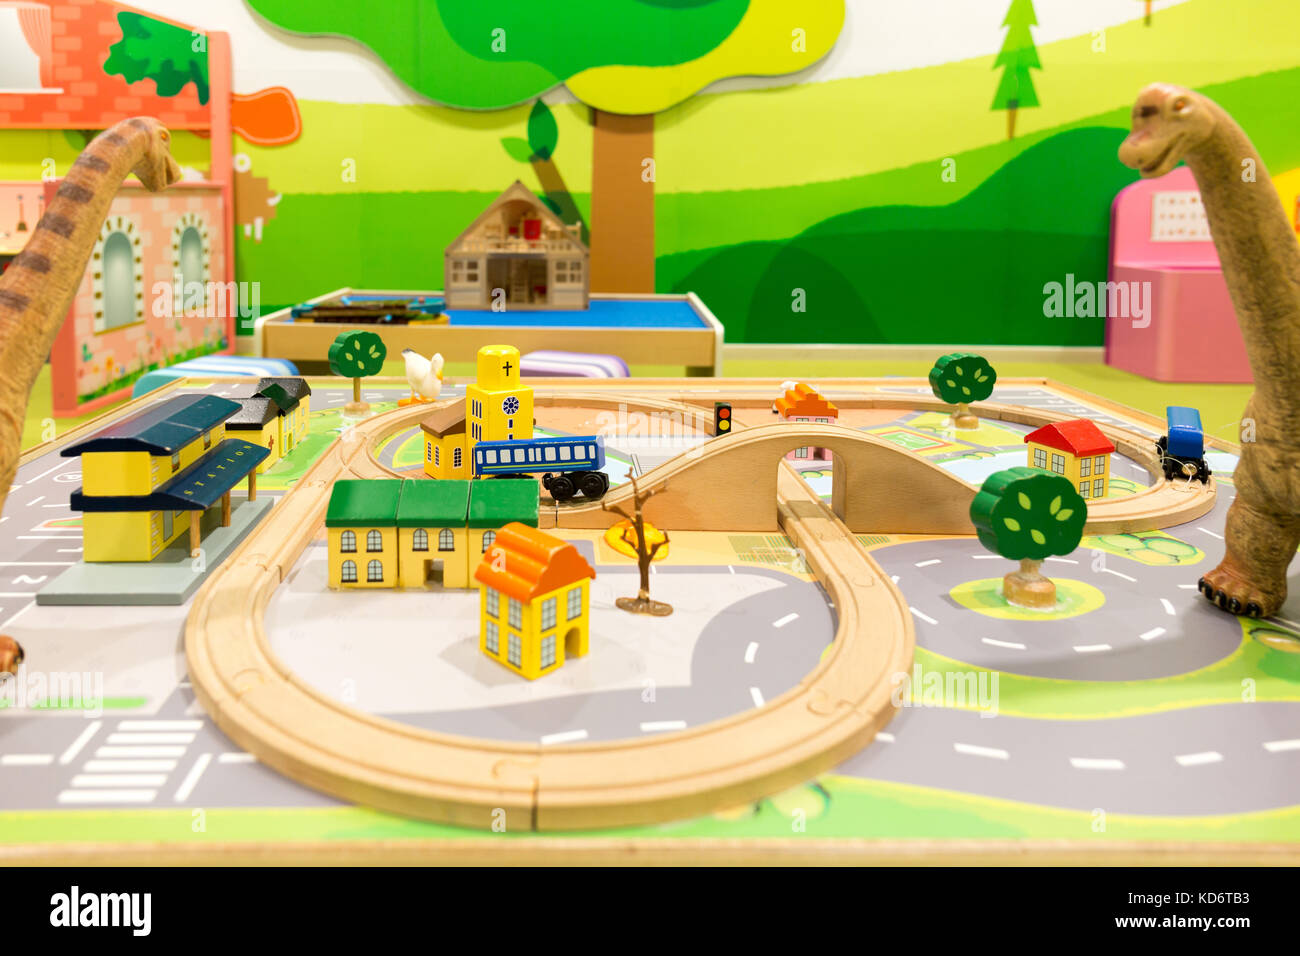 Toys for Kids, Dinosaurs Looking at Children's Railway Structure and Houses. Stock Photo